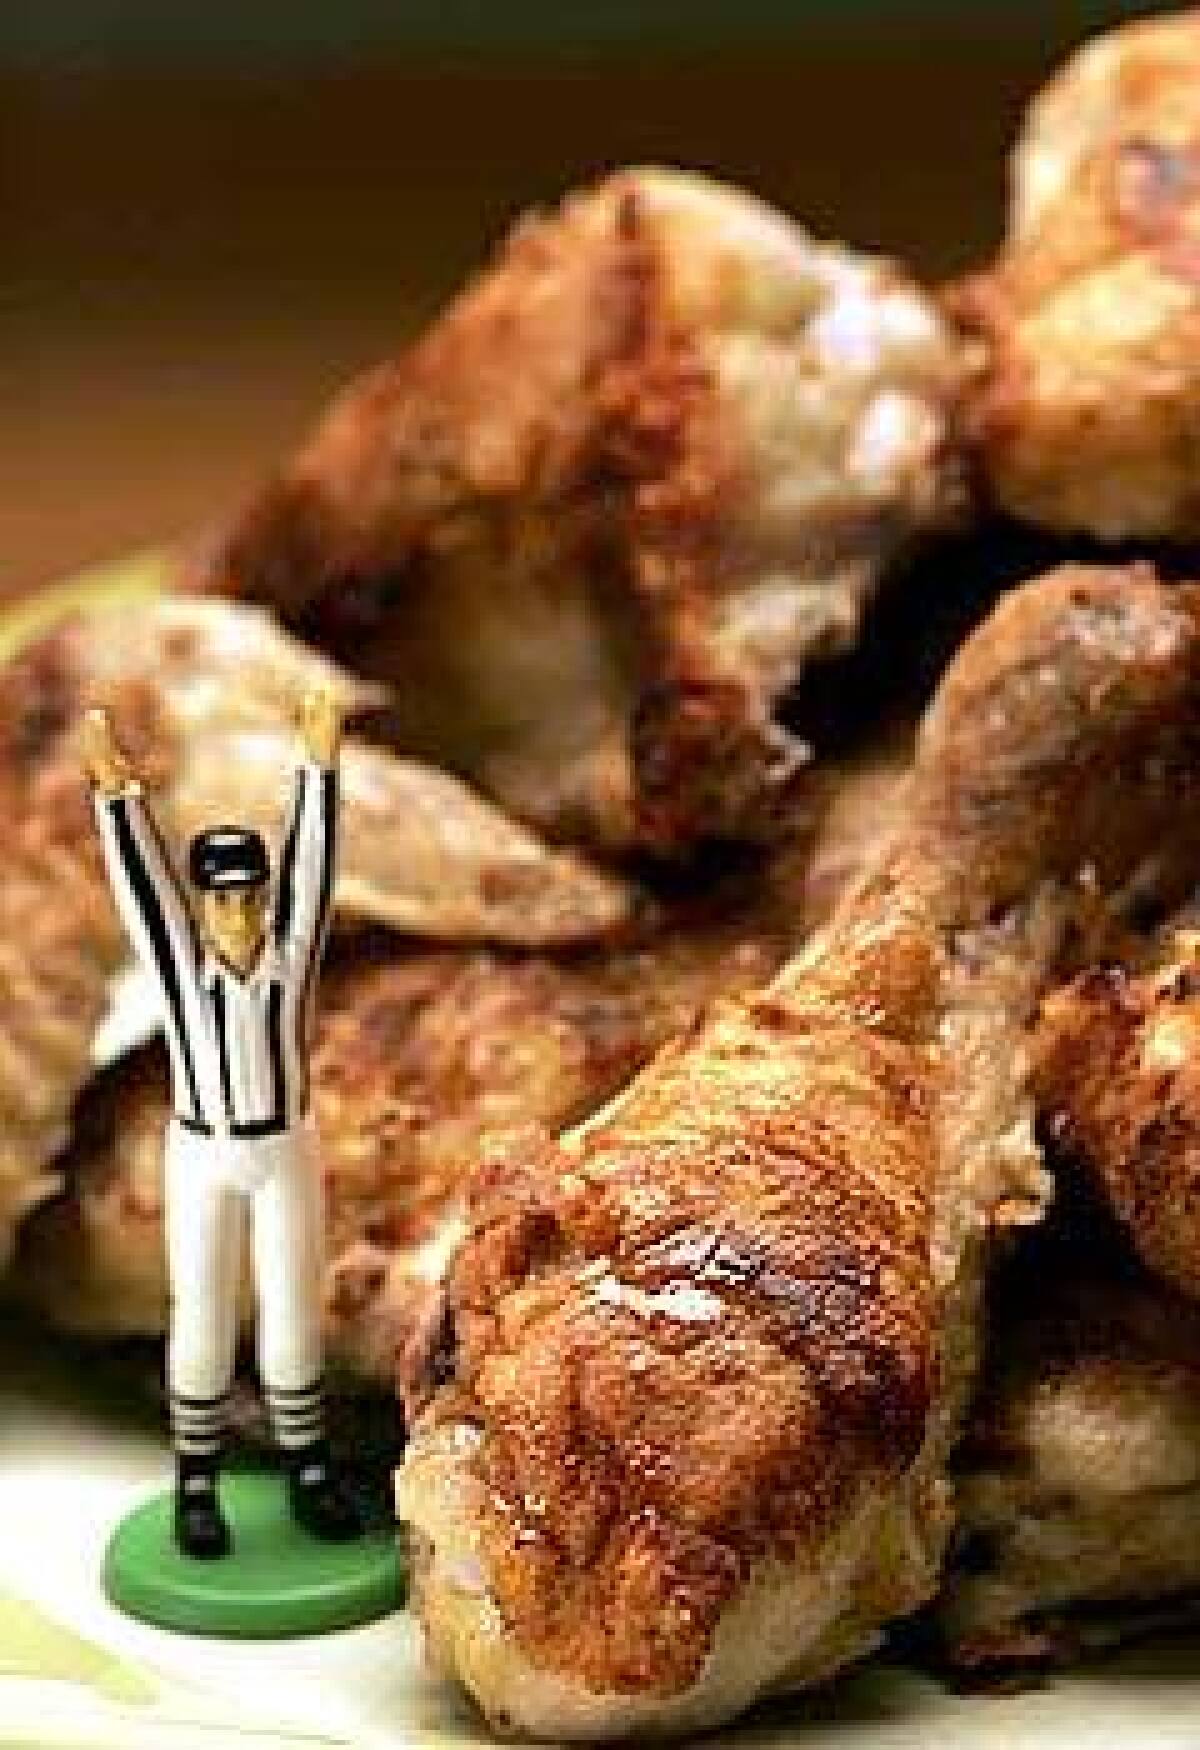 Served hot or cold, fried chicken scores big with the Super Bowl crowd watching at home, whether theyre Patriots or Eagles fans.